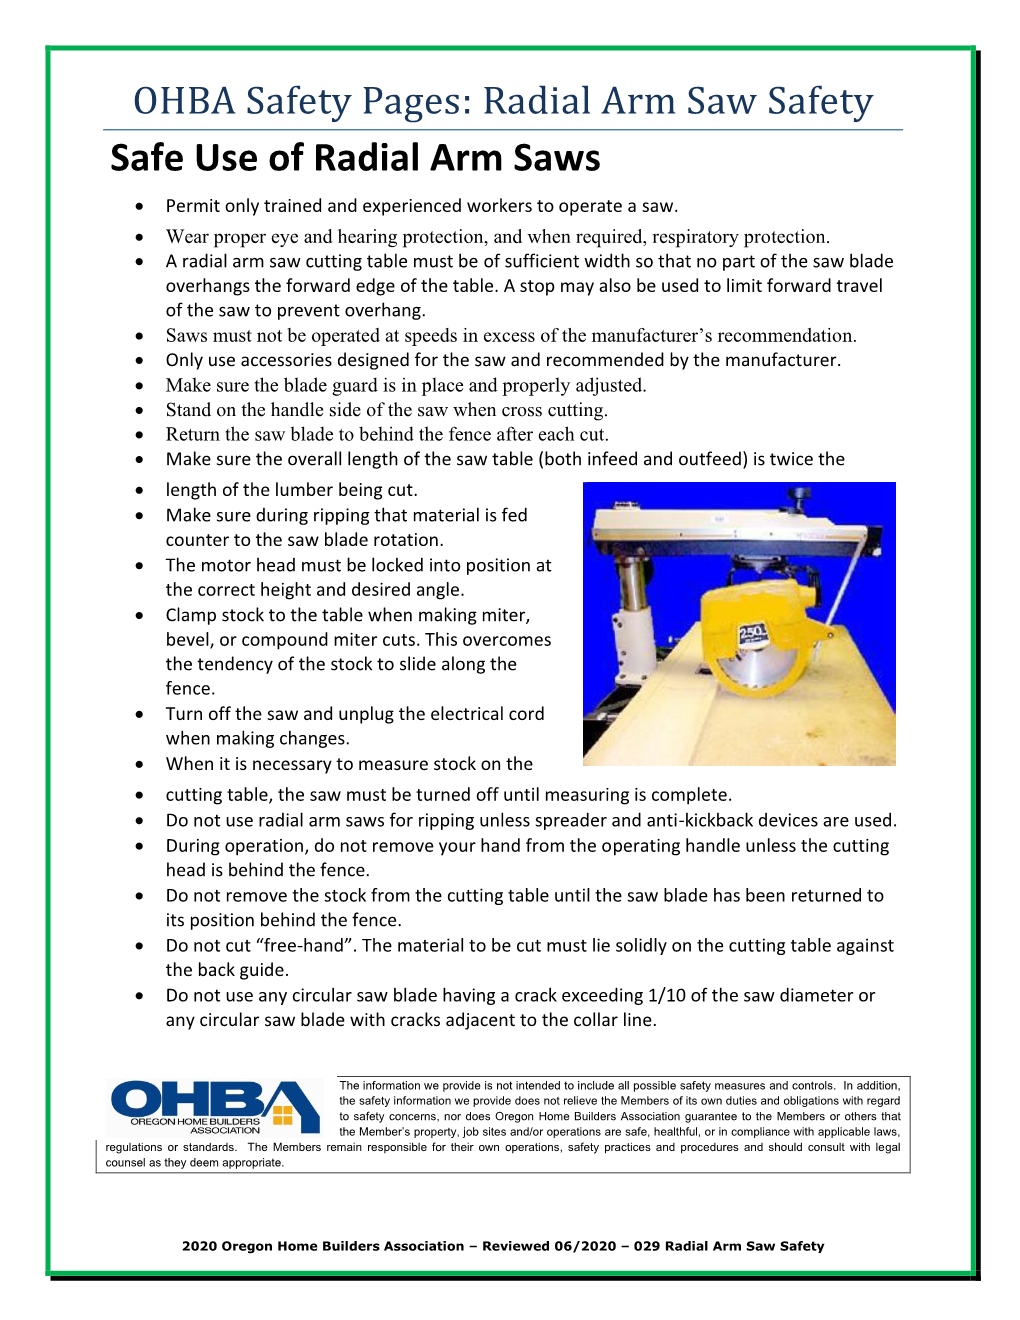 Safe Use of Radial Arm Saws • Permit Only Trained and Experienced Workers to Operate a Saw